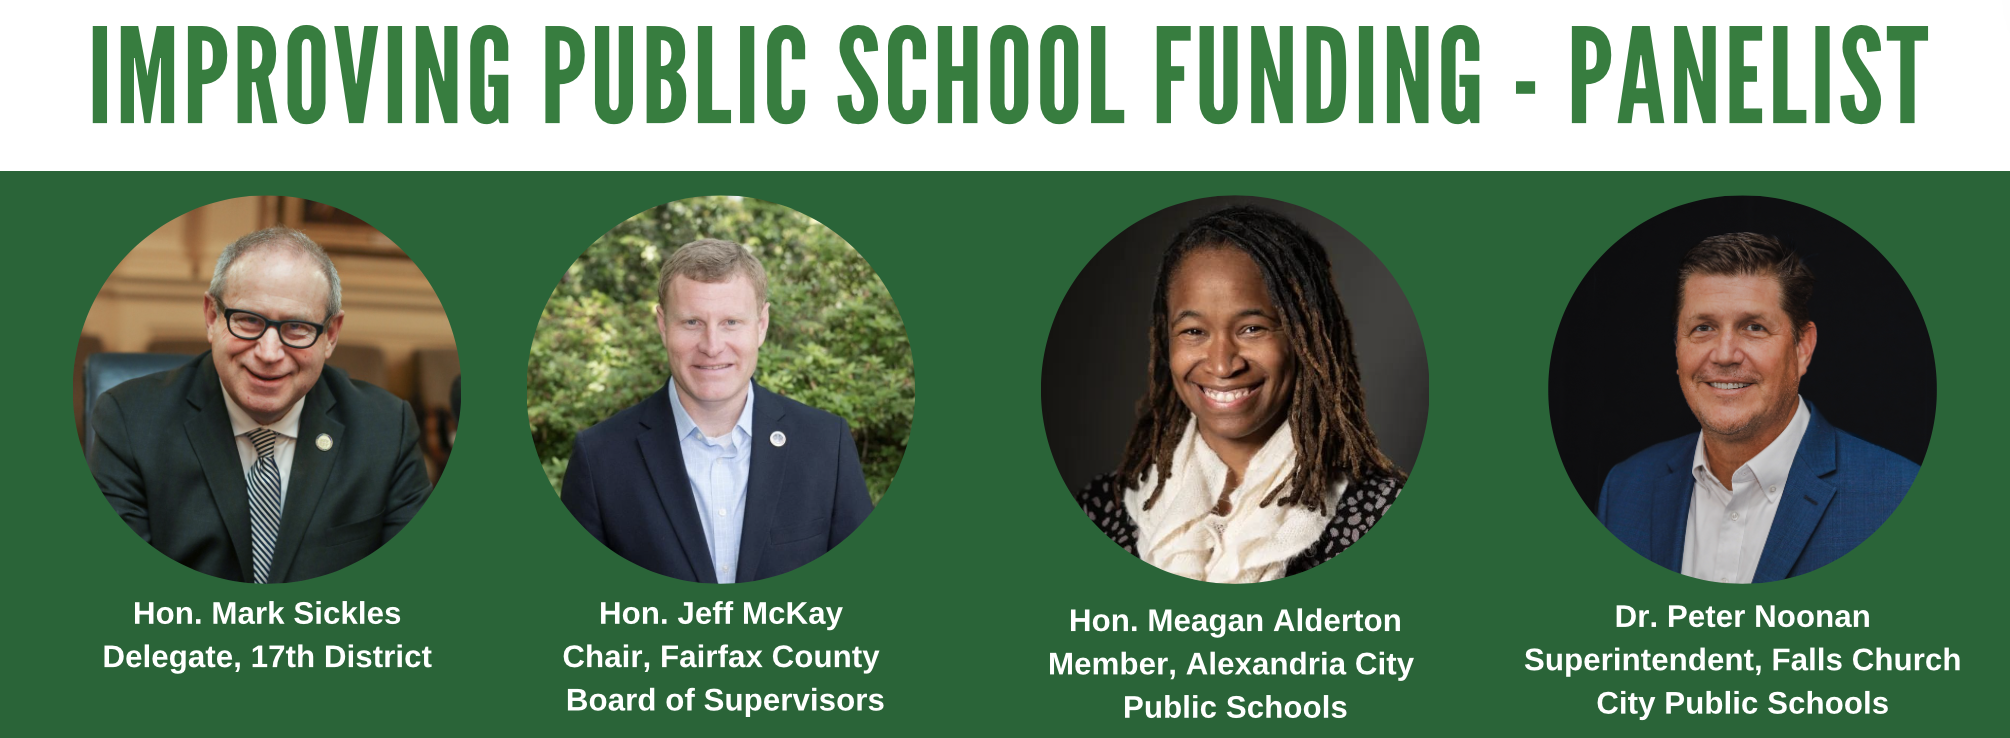 A collage of photos of the Improving Public School Funding panelists. Featured from left to right is the Hon. Mark Sickles, Hon. Jeff McKay, Hon. Megan Alderton, and Dr. Peter Noonan